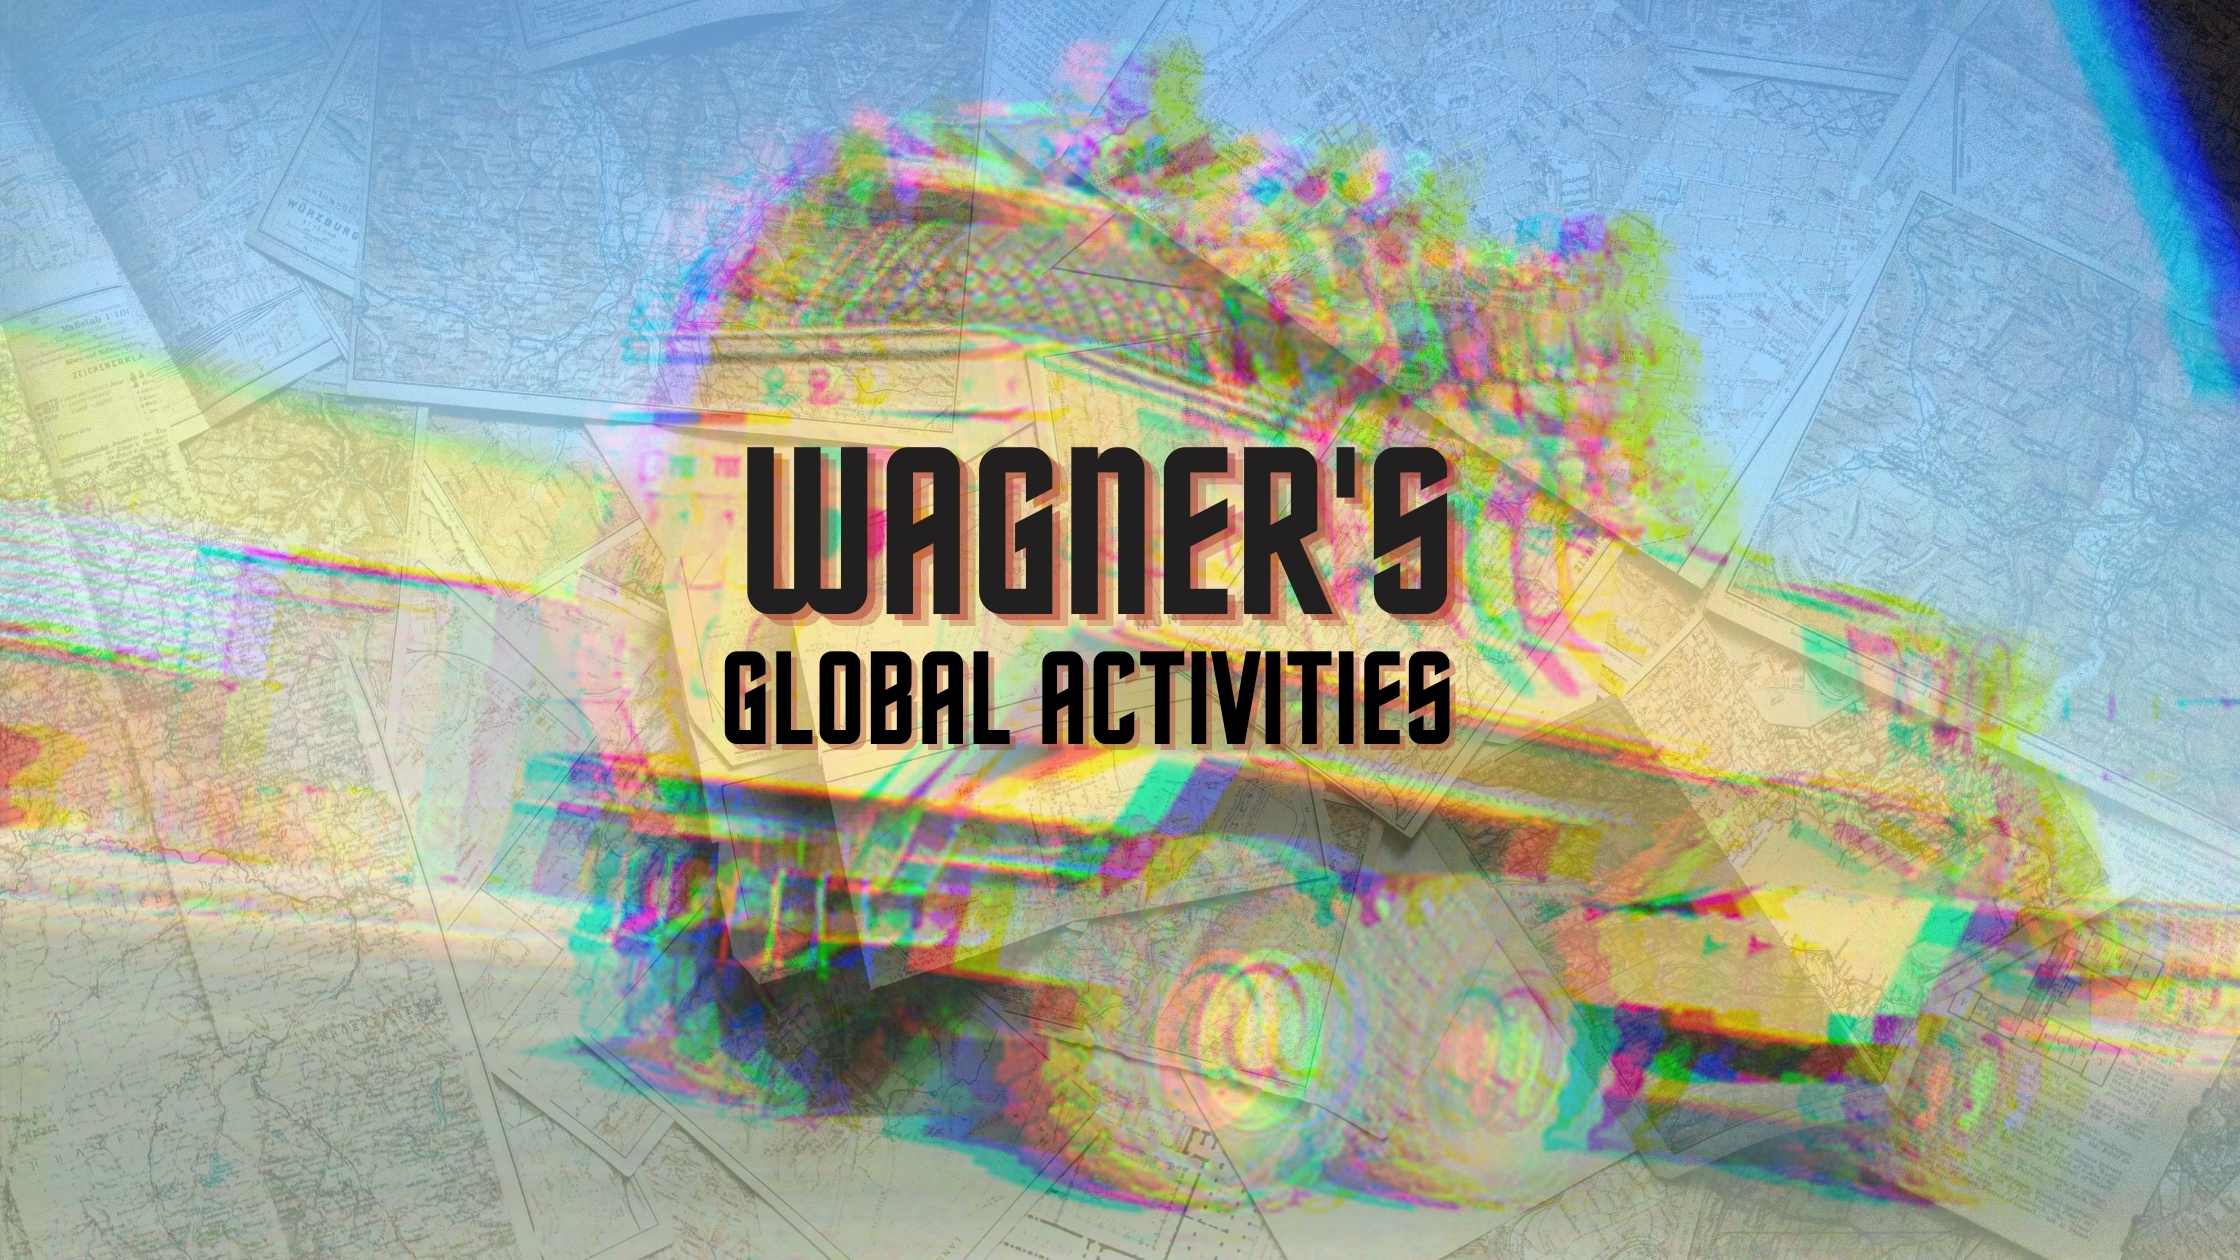 Putin’s Mercenaries on Tour: Mapping the Wagner Group’s Global Activities